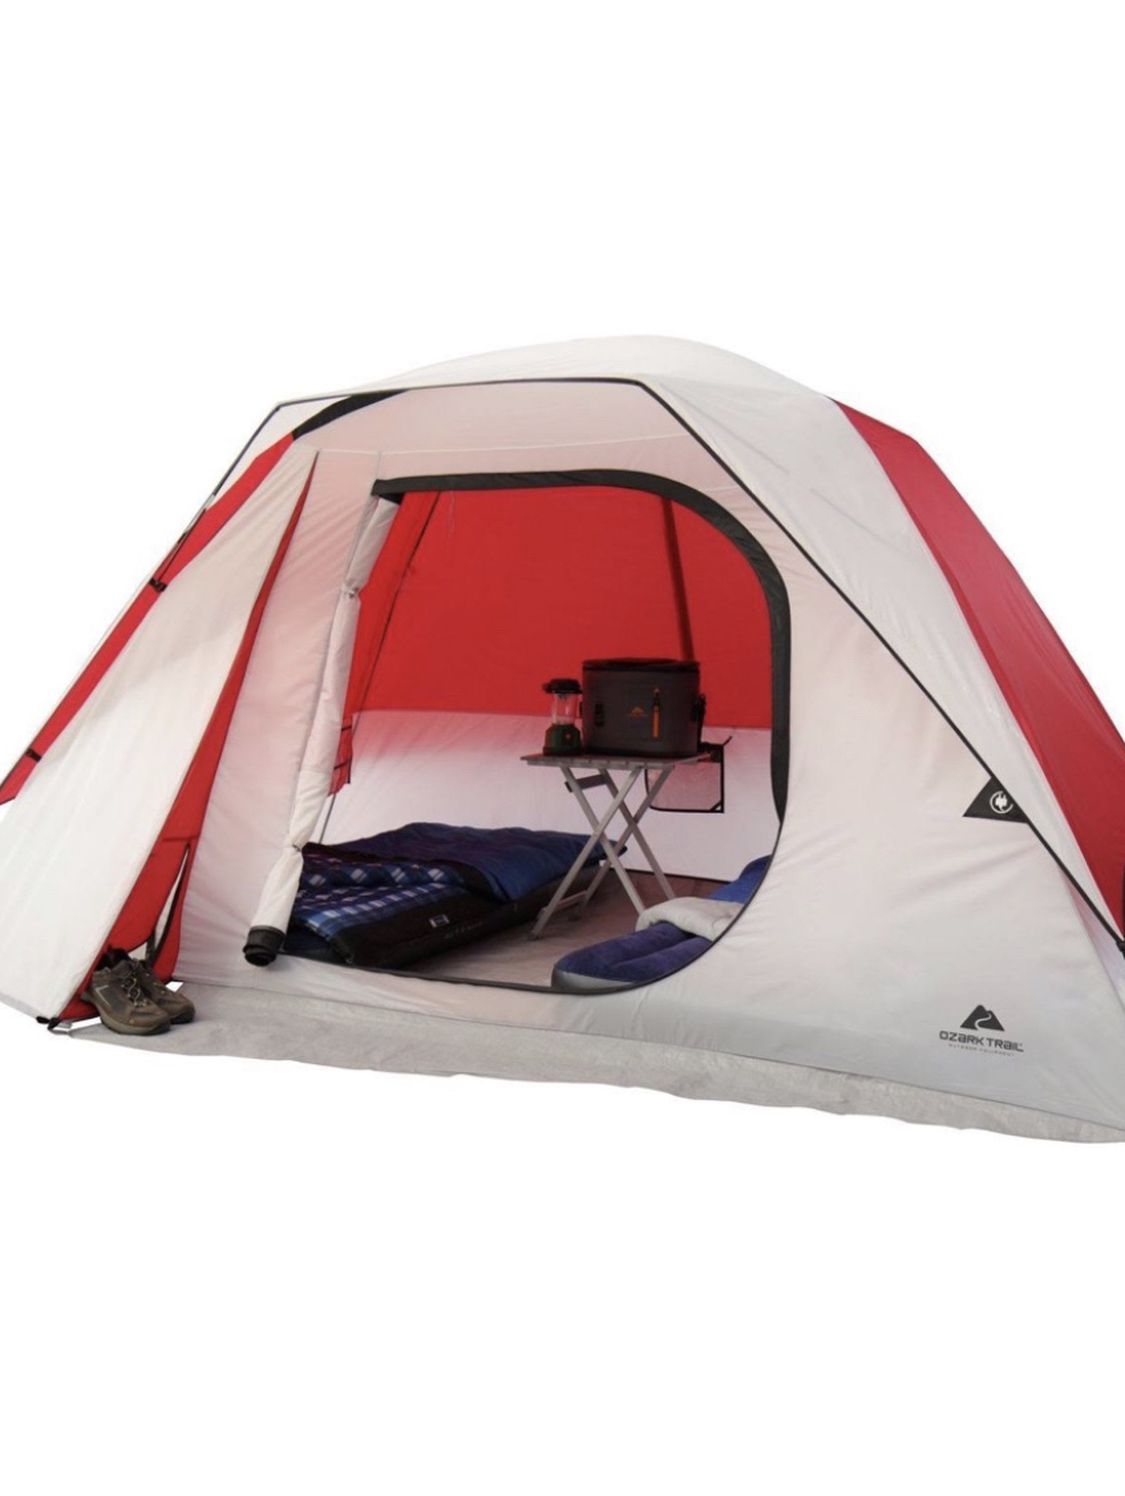 Ozark Trail 6 Person Dome Outdoor Camping Tent